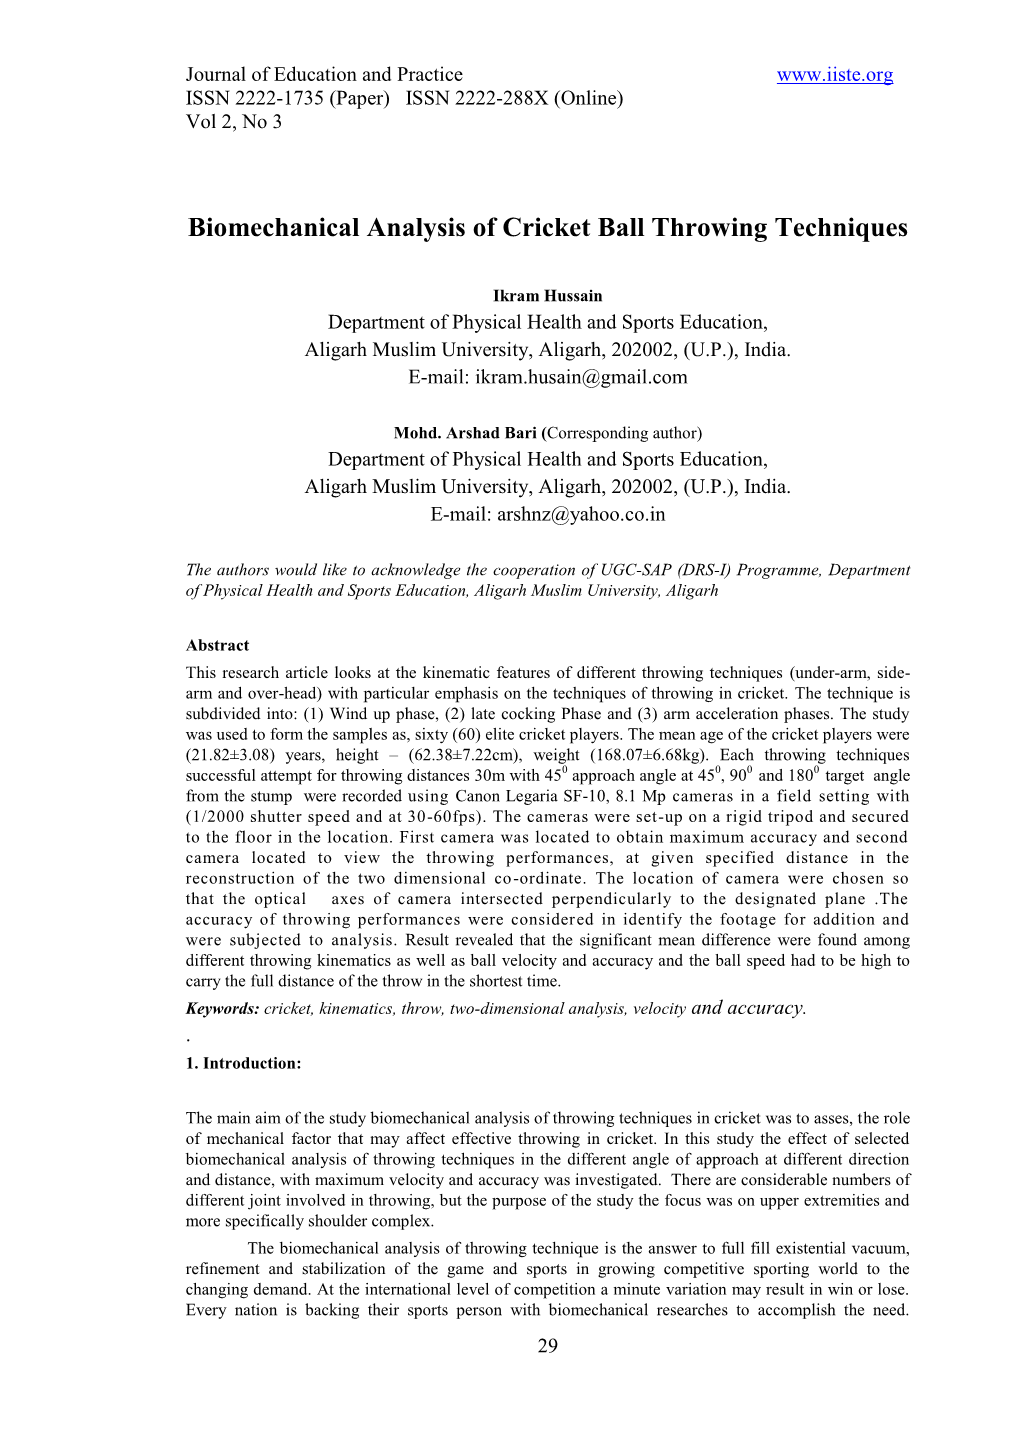 Biomechanical Analysis of Cricket Ball Throwing Techniques